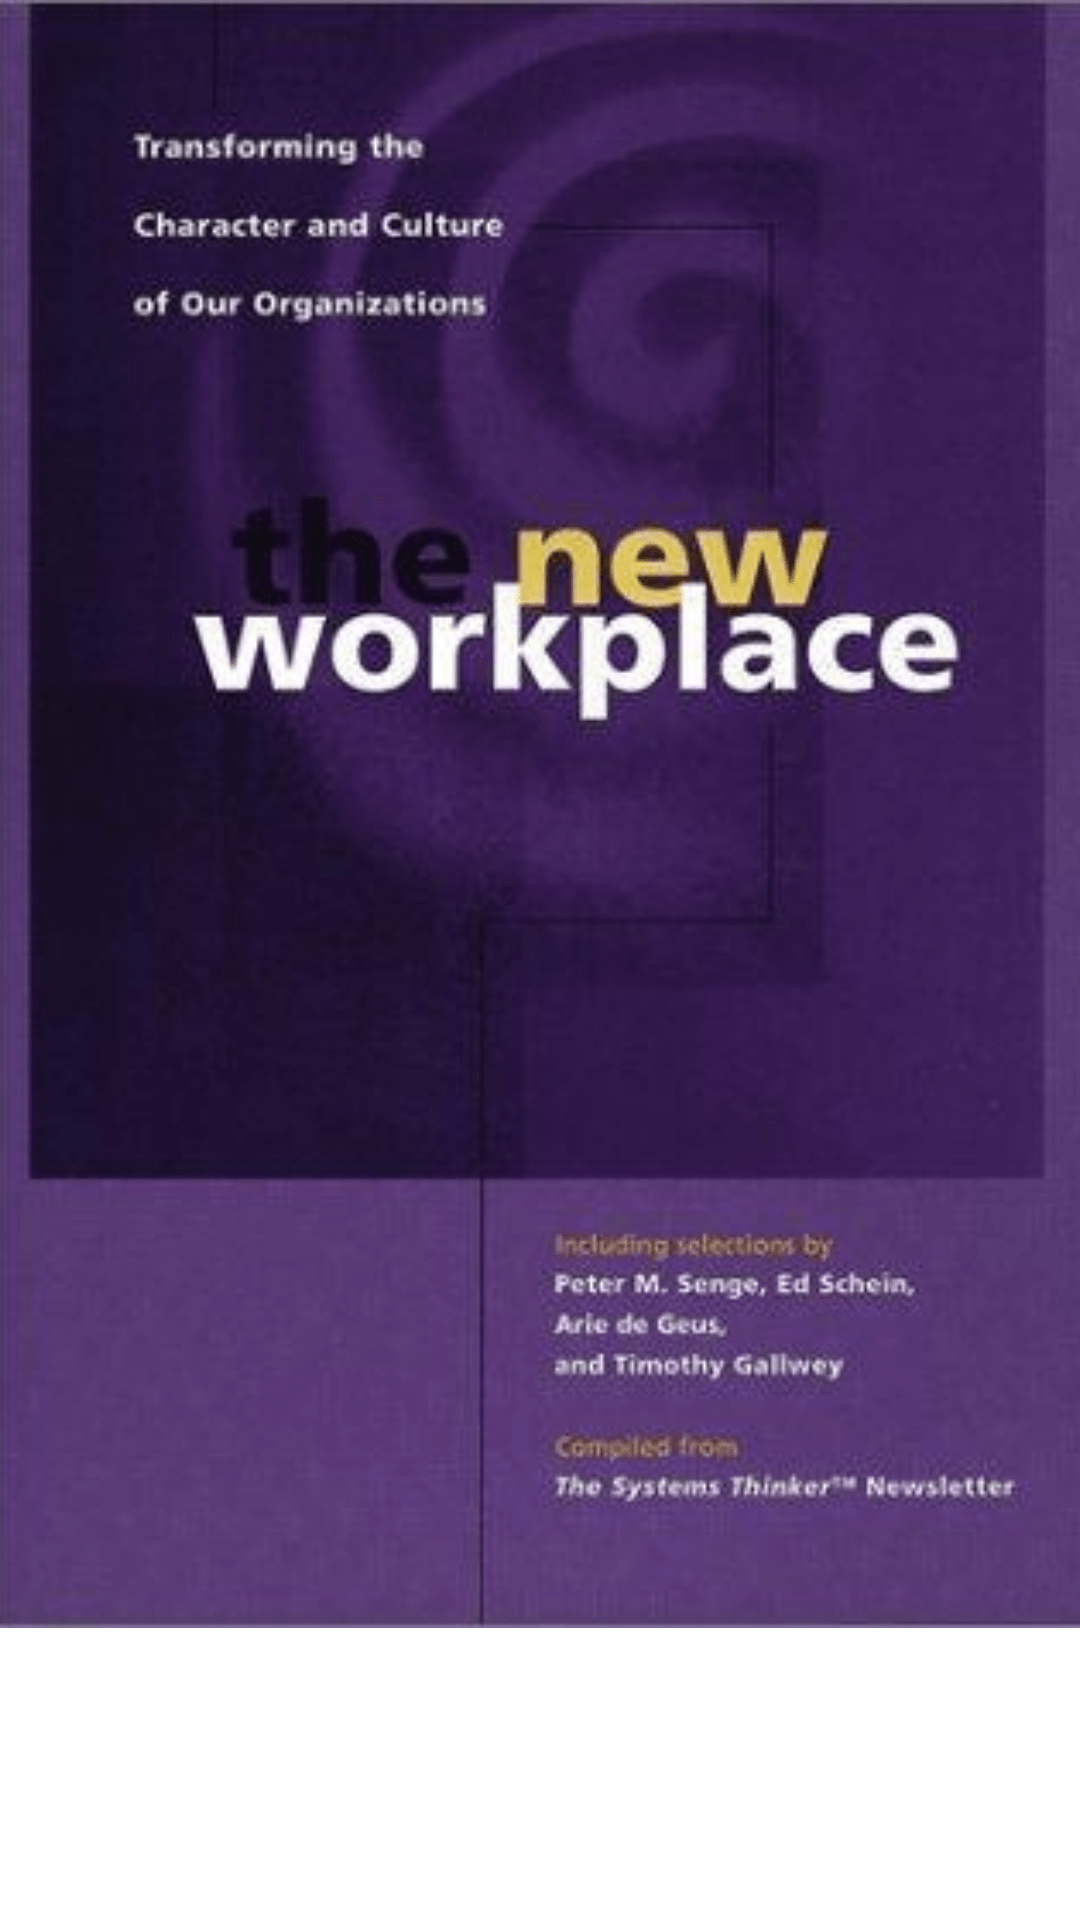 The New Workplace: Transforming the Character and Culture of Our Organizations